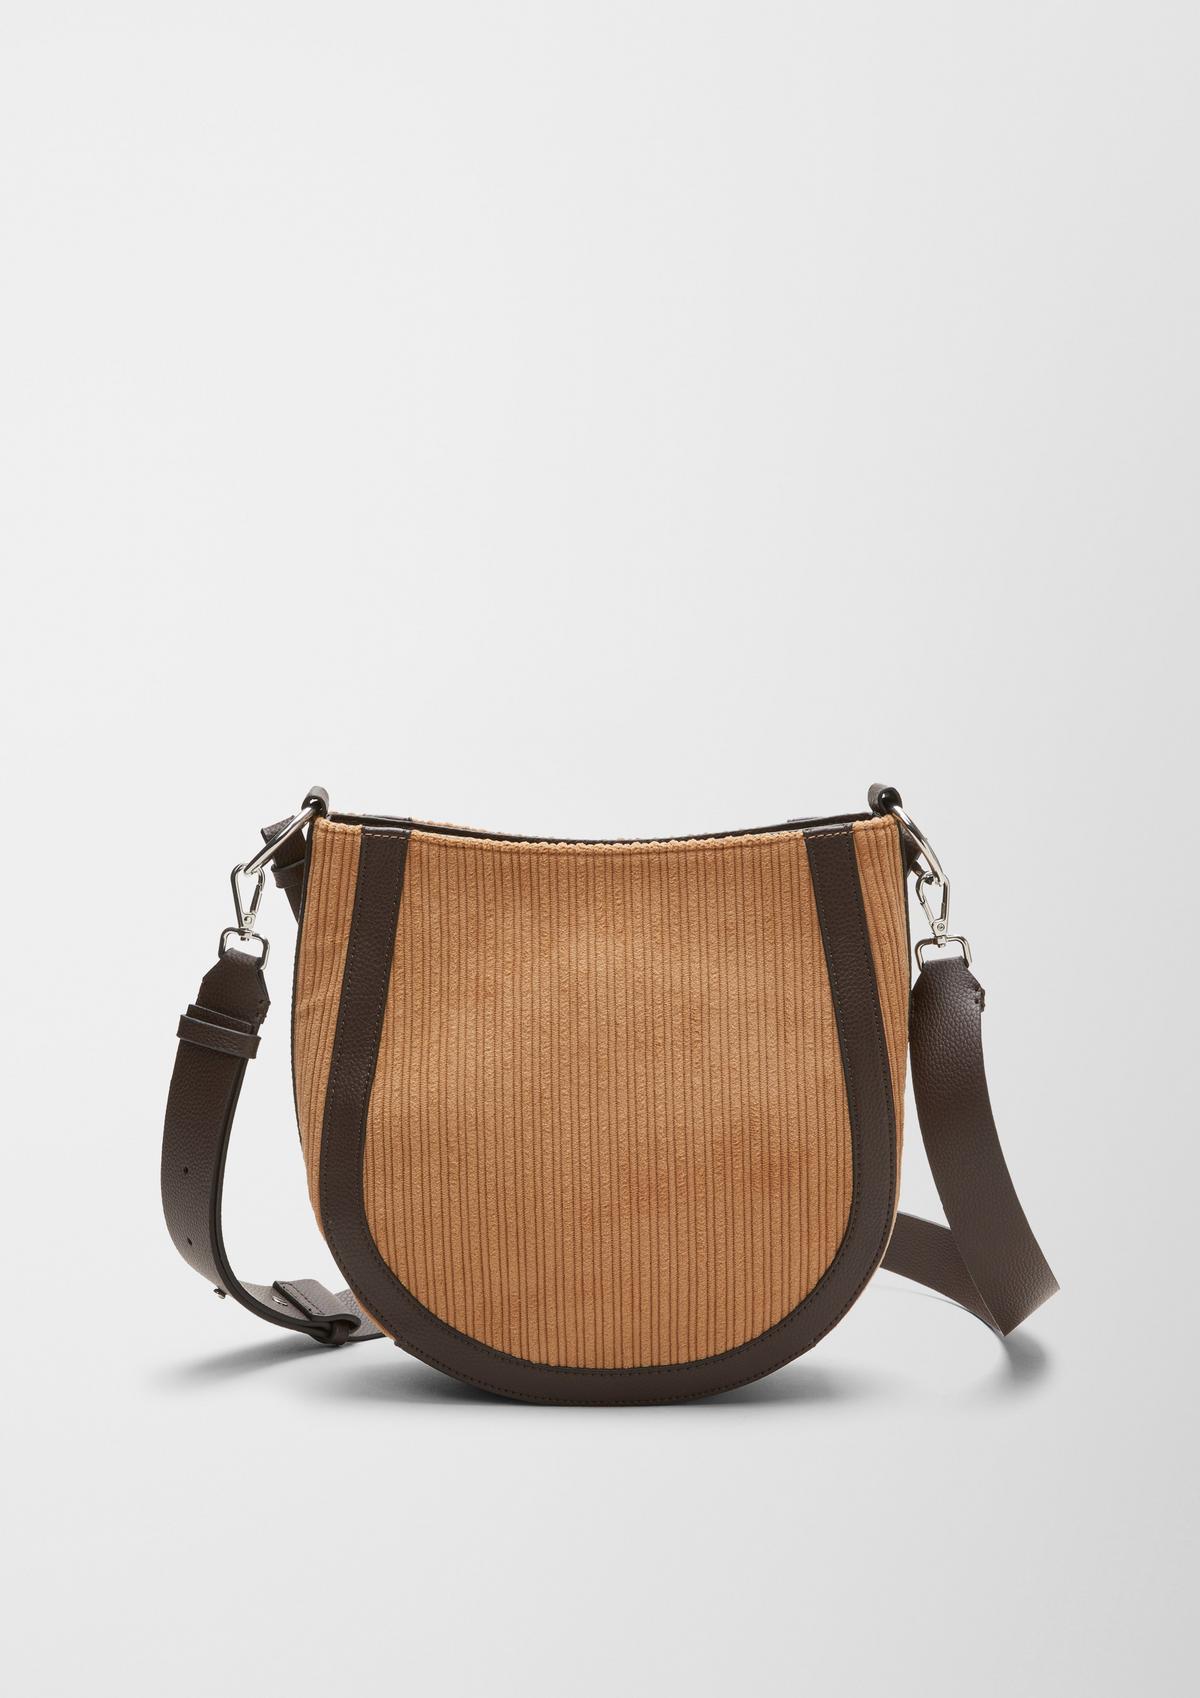 s.Oliver Hobo bag made of corduroy and faux leather